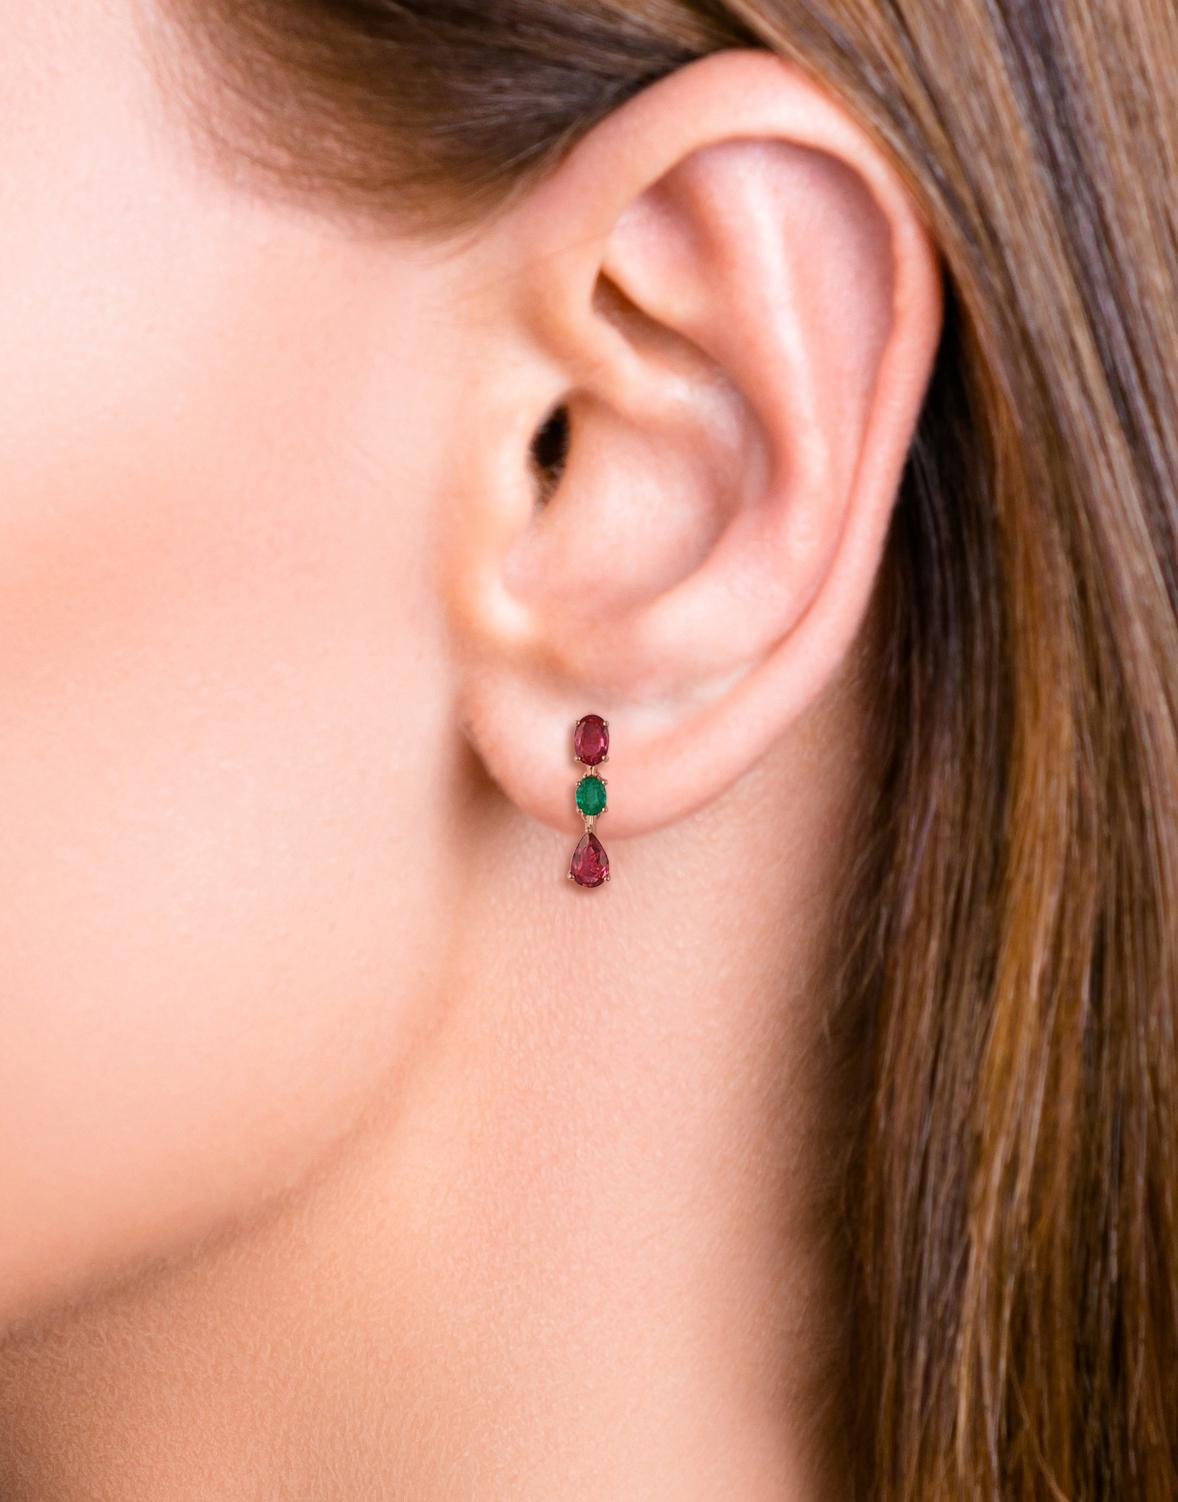 Artisan 2.43 Carat Mozambique Ruby & Emerald Stud Earrings in 18k Gold For Sale